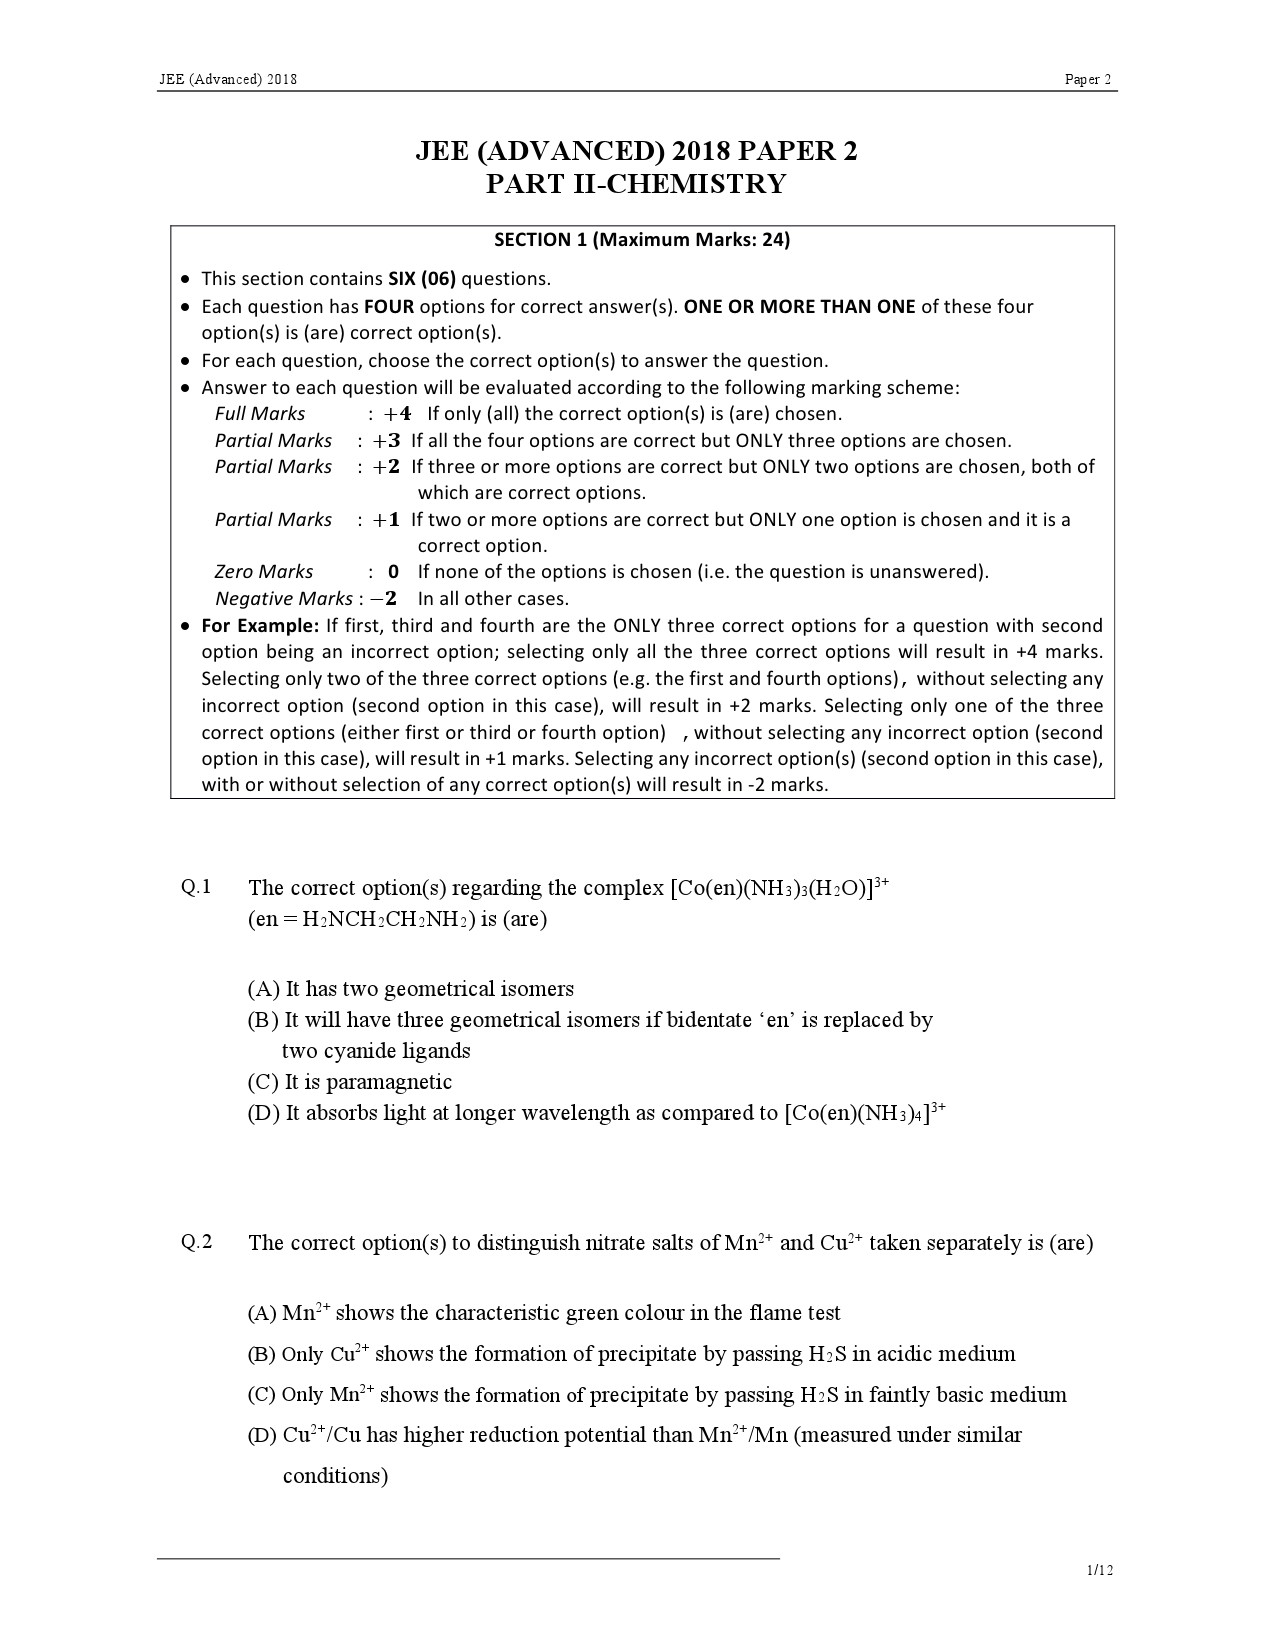 JEE Advanced Exam Question Paper 2018 Paper 2 Chemistry 1